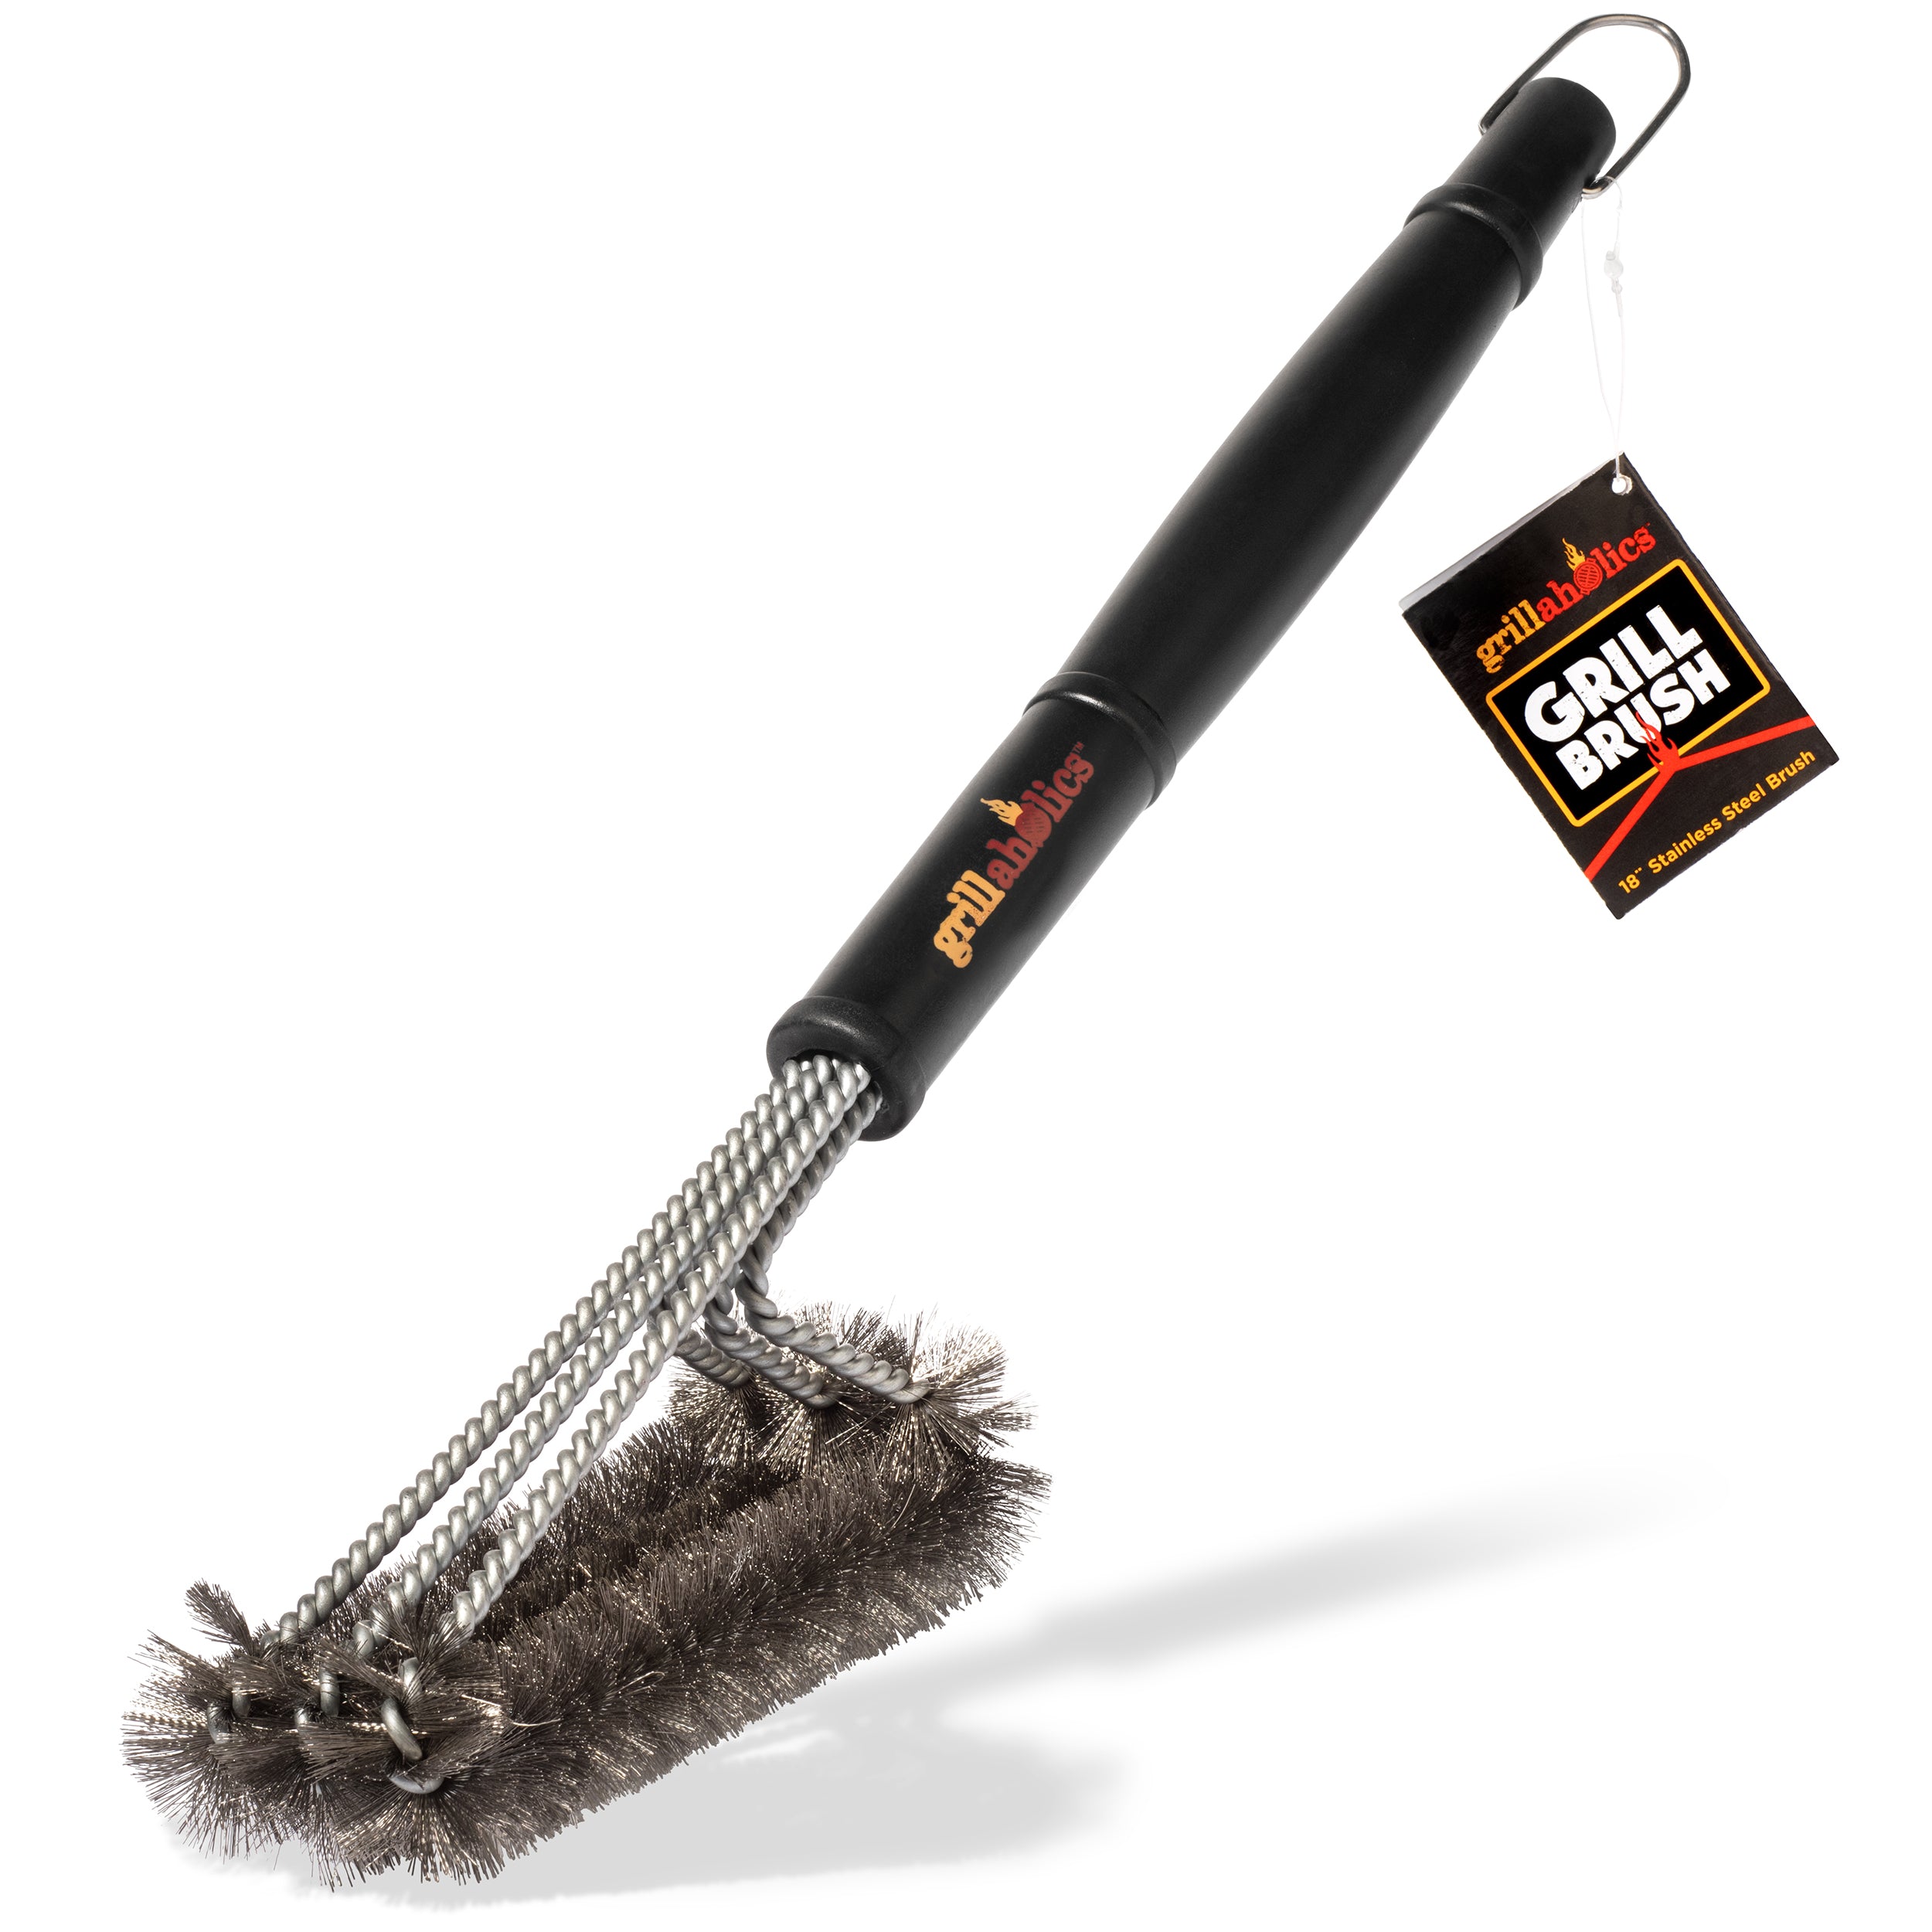 Grillaholics Bristle-Free Grill Brush, Finally A SAFE Grill Brush